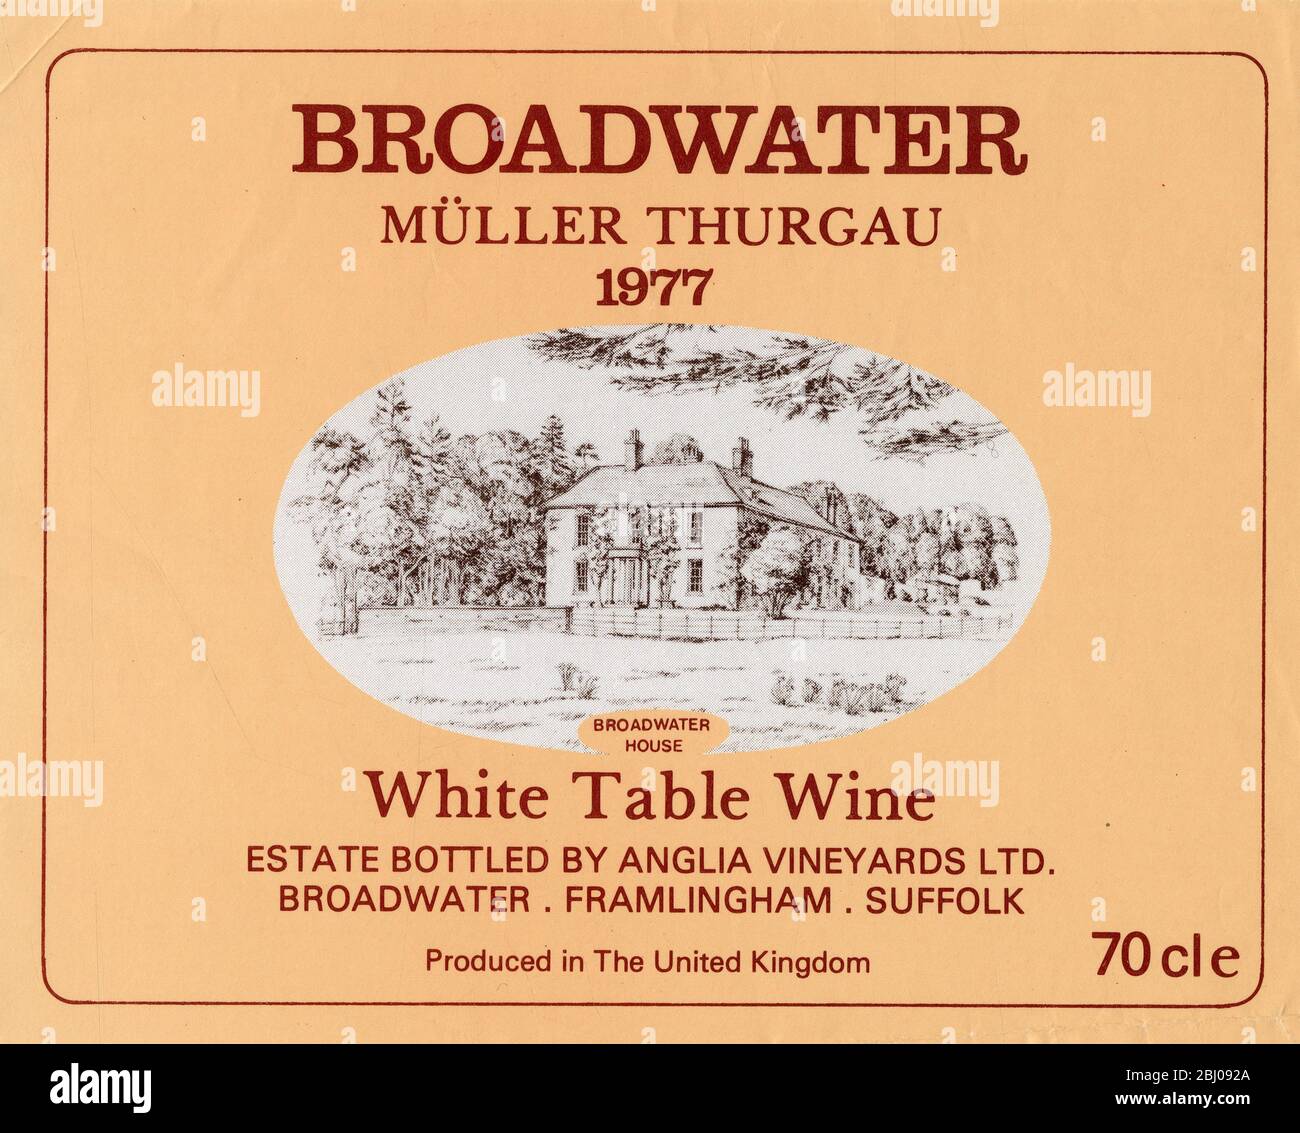 Wine Label. - Broadwater. Muller Thurgau. 1977. - White Table Wine. Estate Bottled by Anglia Vineyards Ltd. Broadwater. Framlingham. Suffolk. Produced in the United Kingdom. 70cl. Stock Photo